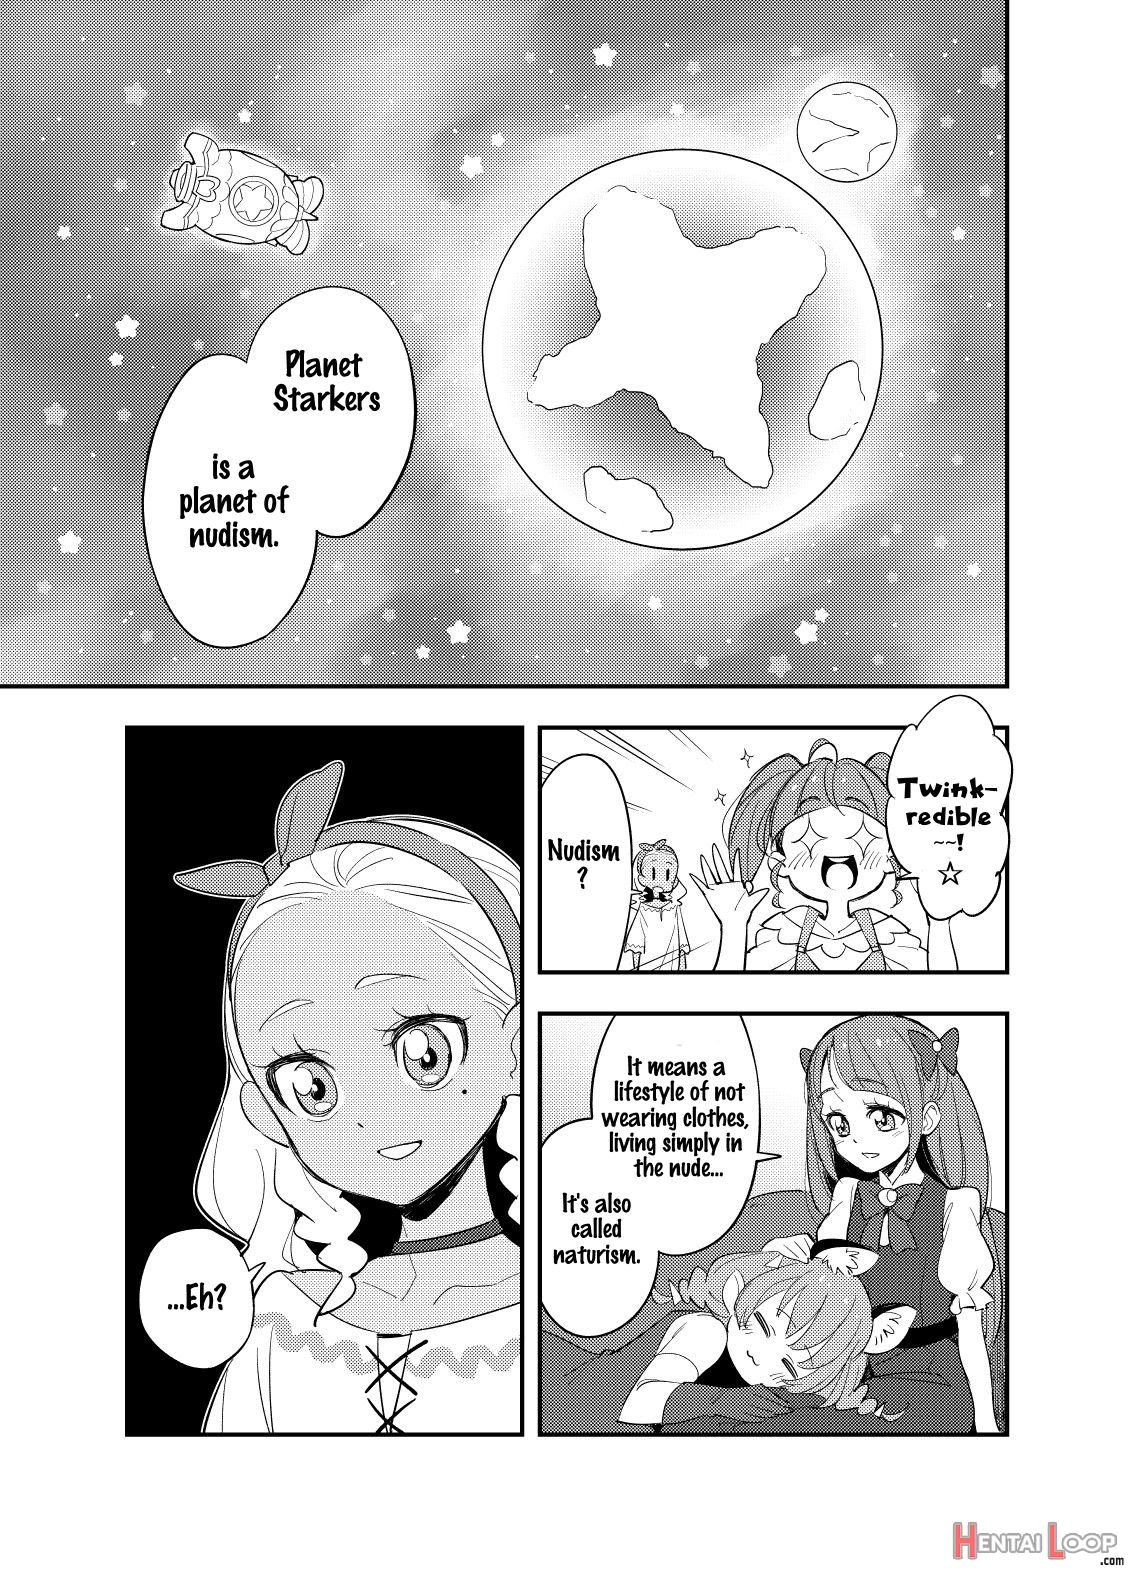 A Trip To Planet Starkers: A Stapre Gag Manga page 2